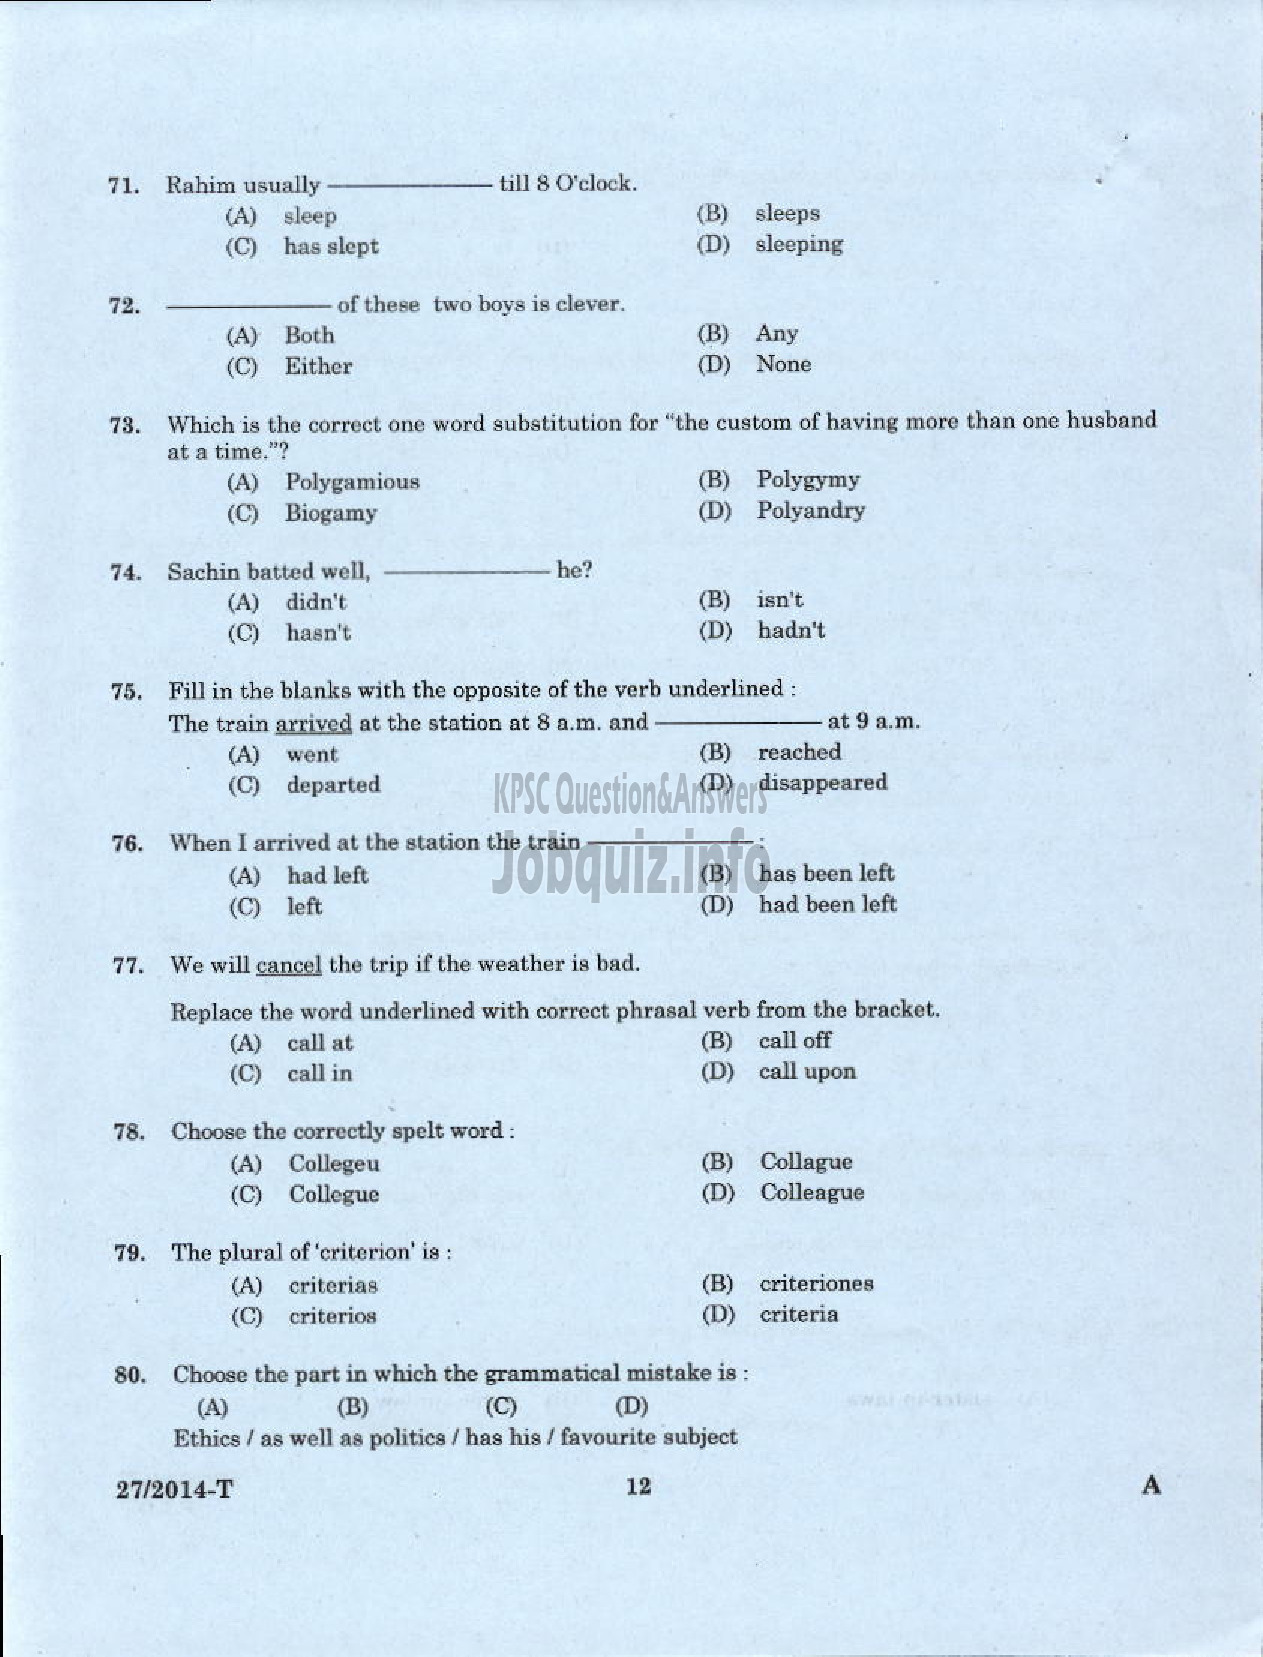 Kerala PSC Question Paper - LOWER DIVISION CLERK 2014 VARIOUS BY TRANSFER ( Tamil )-10